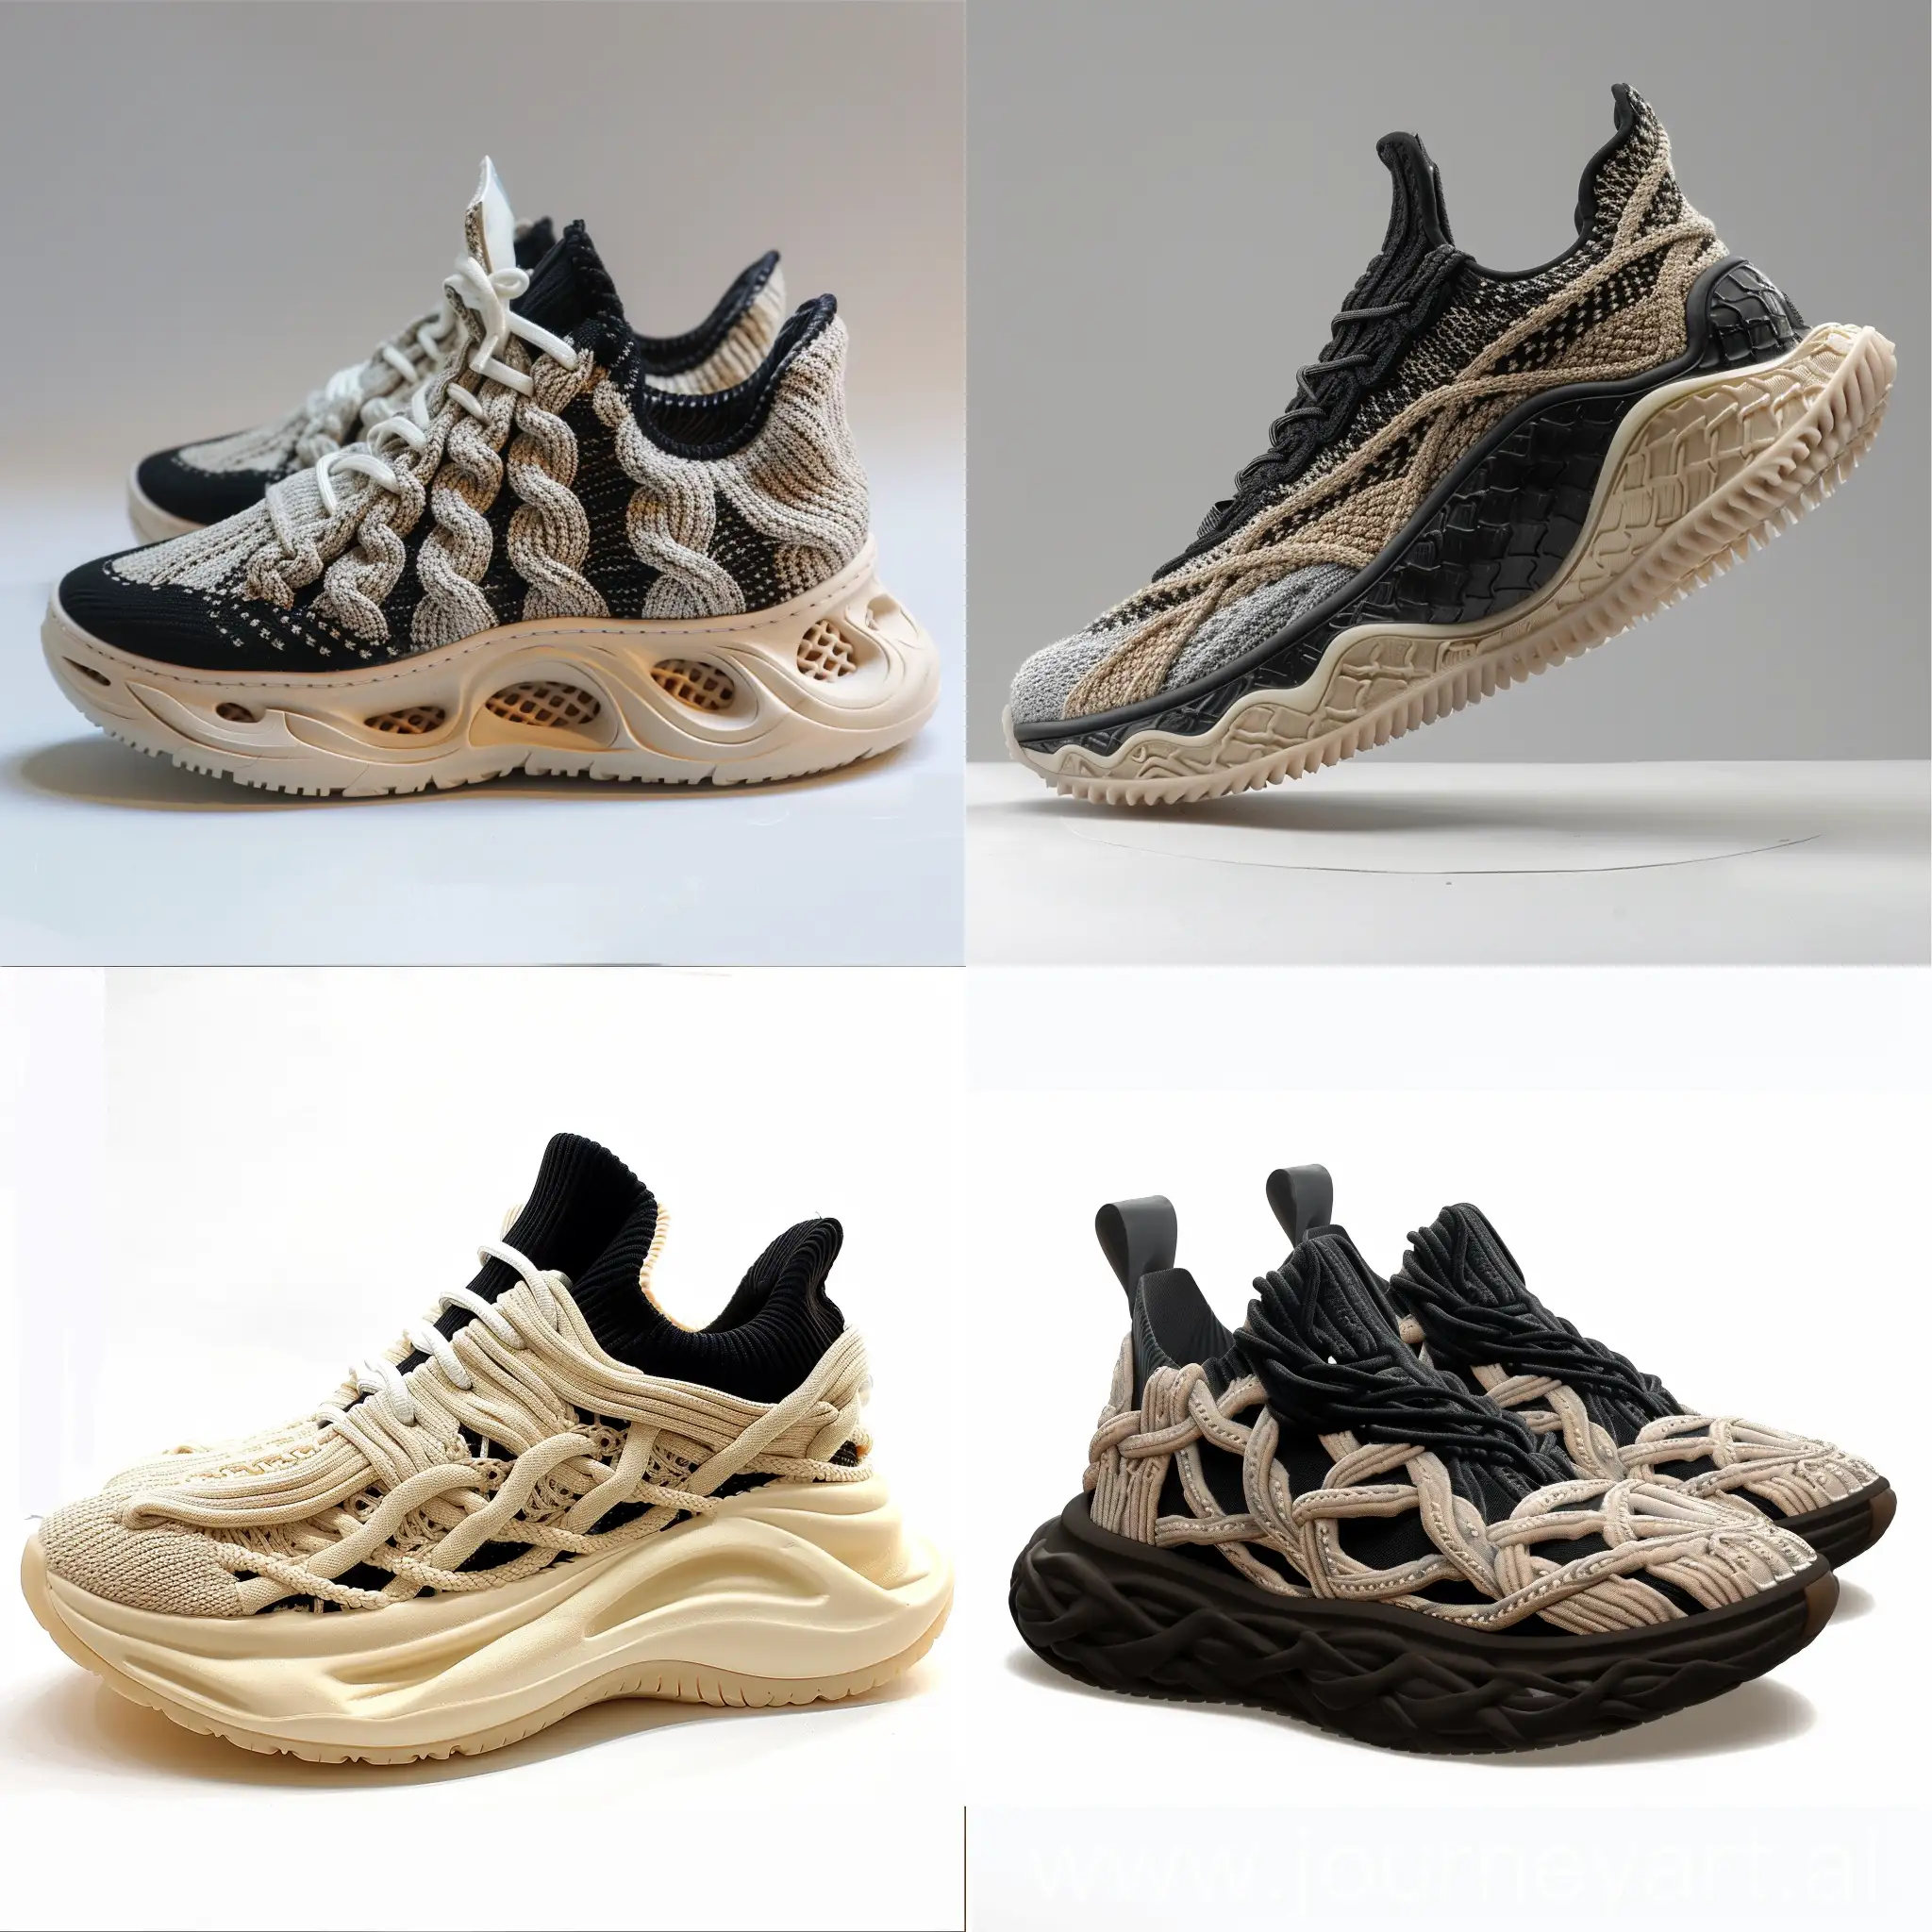 Black-and-Light-Beige-Knitted-Cable-Sneakers-with-Alexander-McQueen-Inspiration